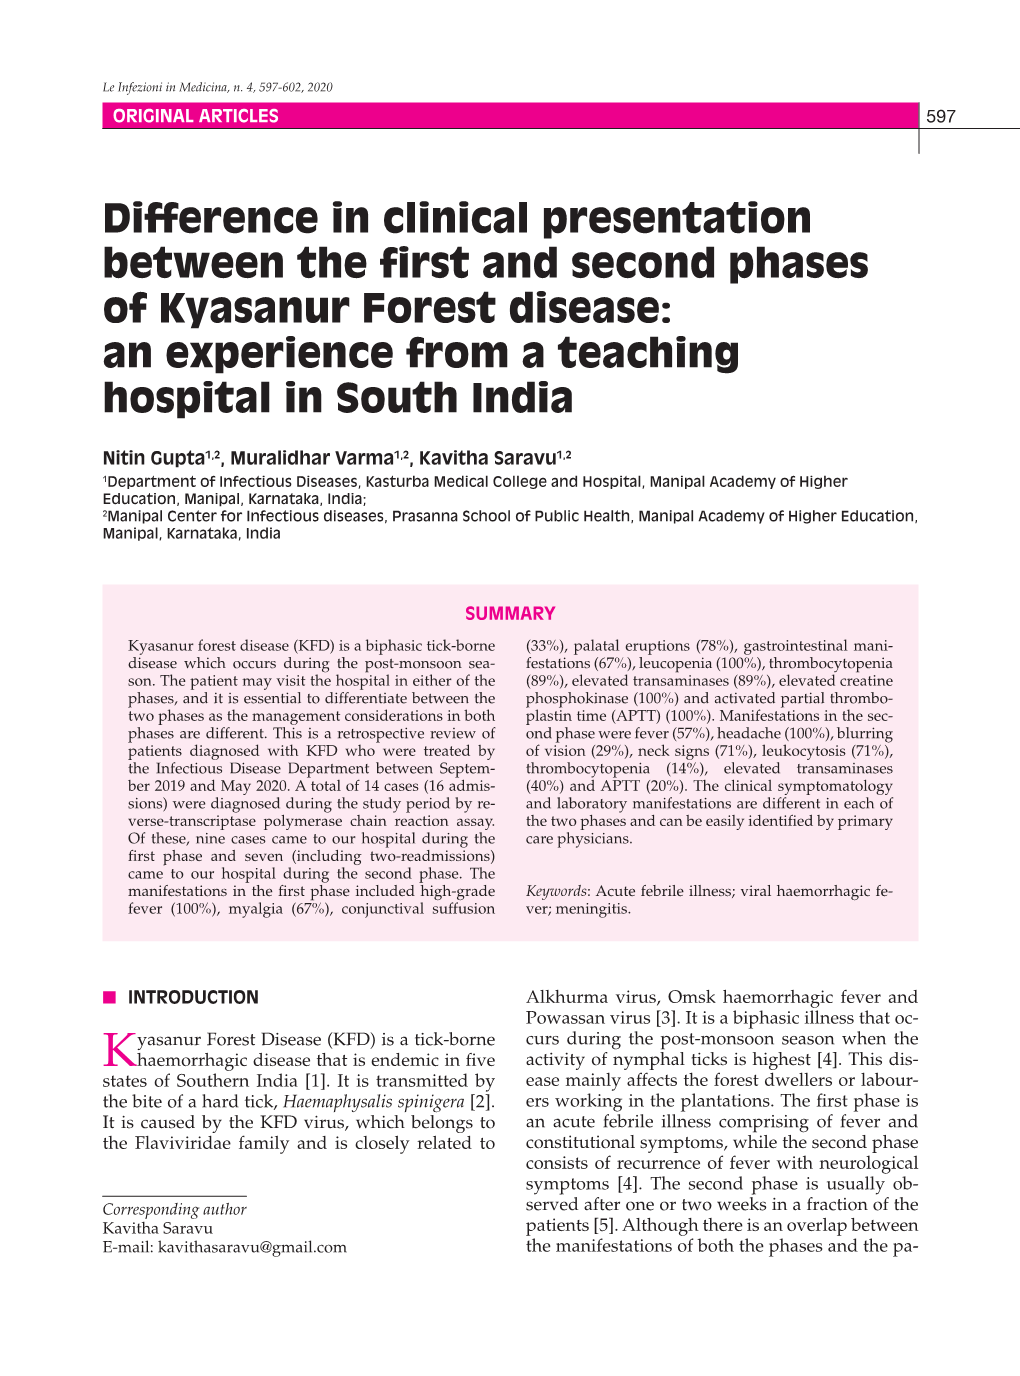 Difference in Clinical Presentation Between the First and Second Phases of Kyasanur Forest Disease: an Experience from a Teaching Hospital in South India